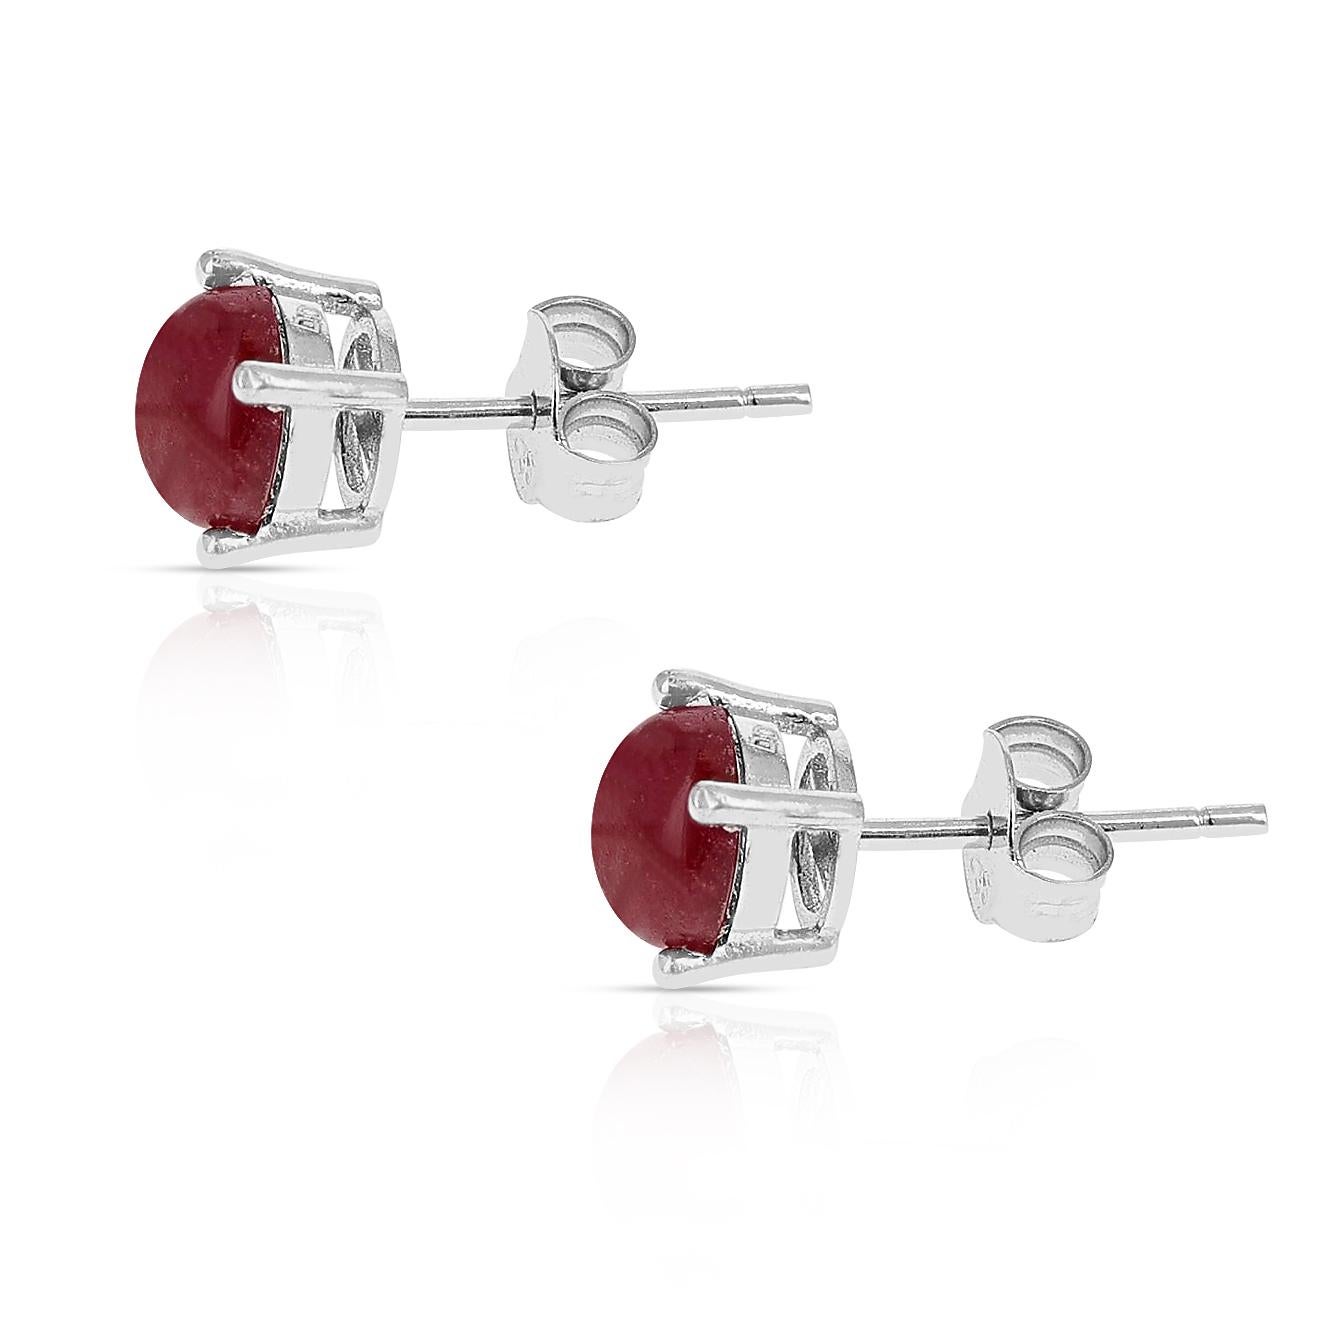 A pair of 6MM Genuine Ruby Round Cabochon Stud Earrings made in Sterling Silver. The total stone weight is approximately 2.30 carats.